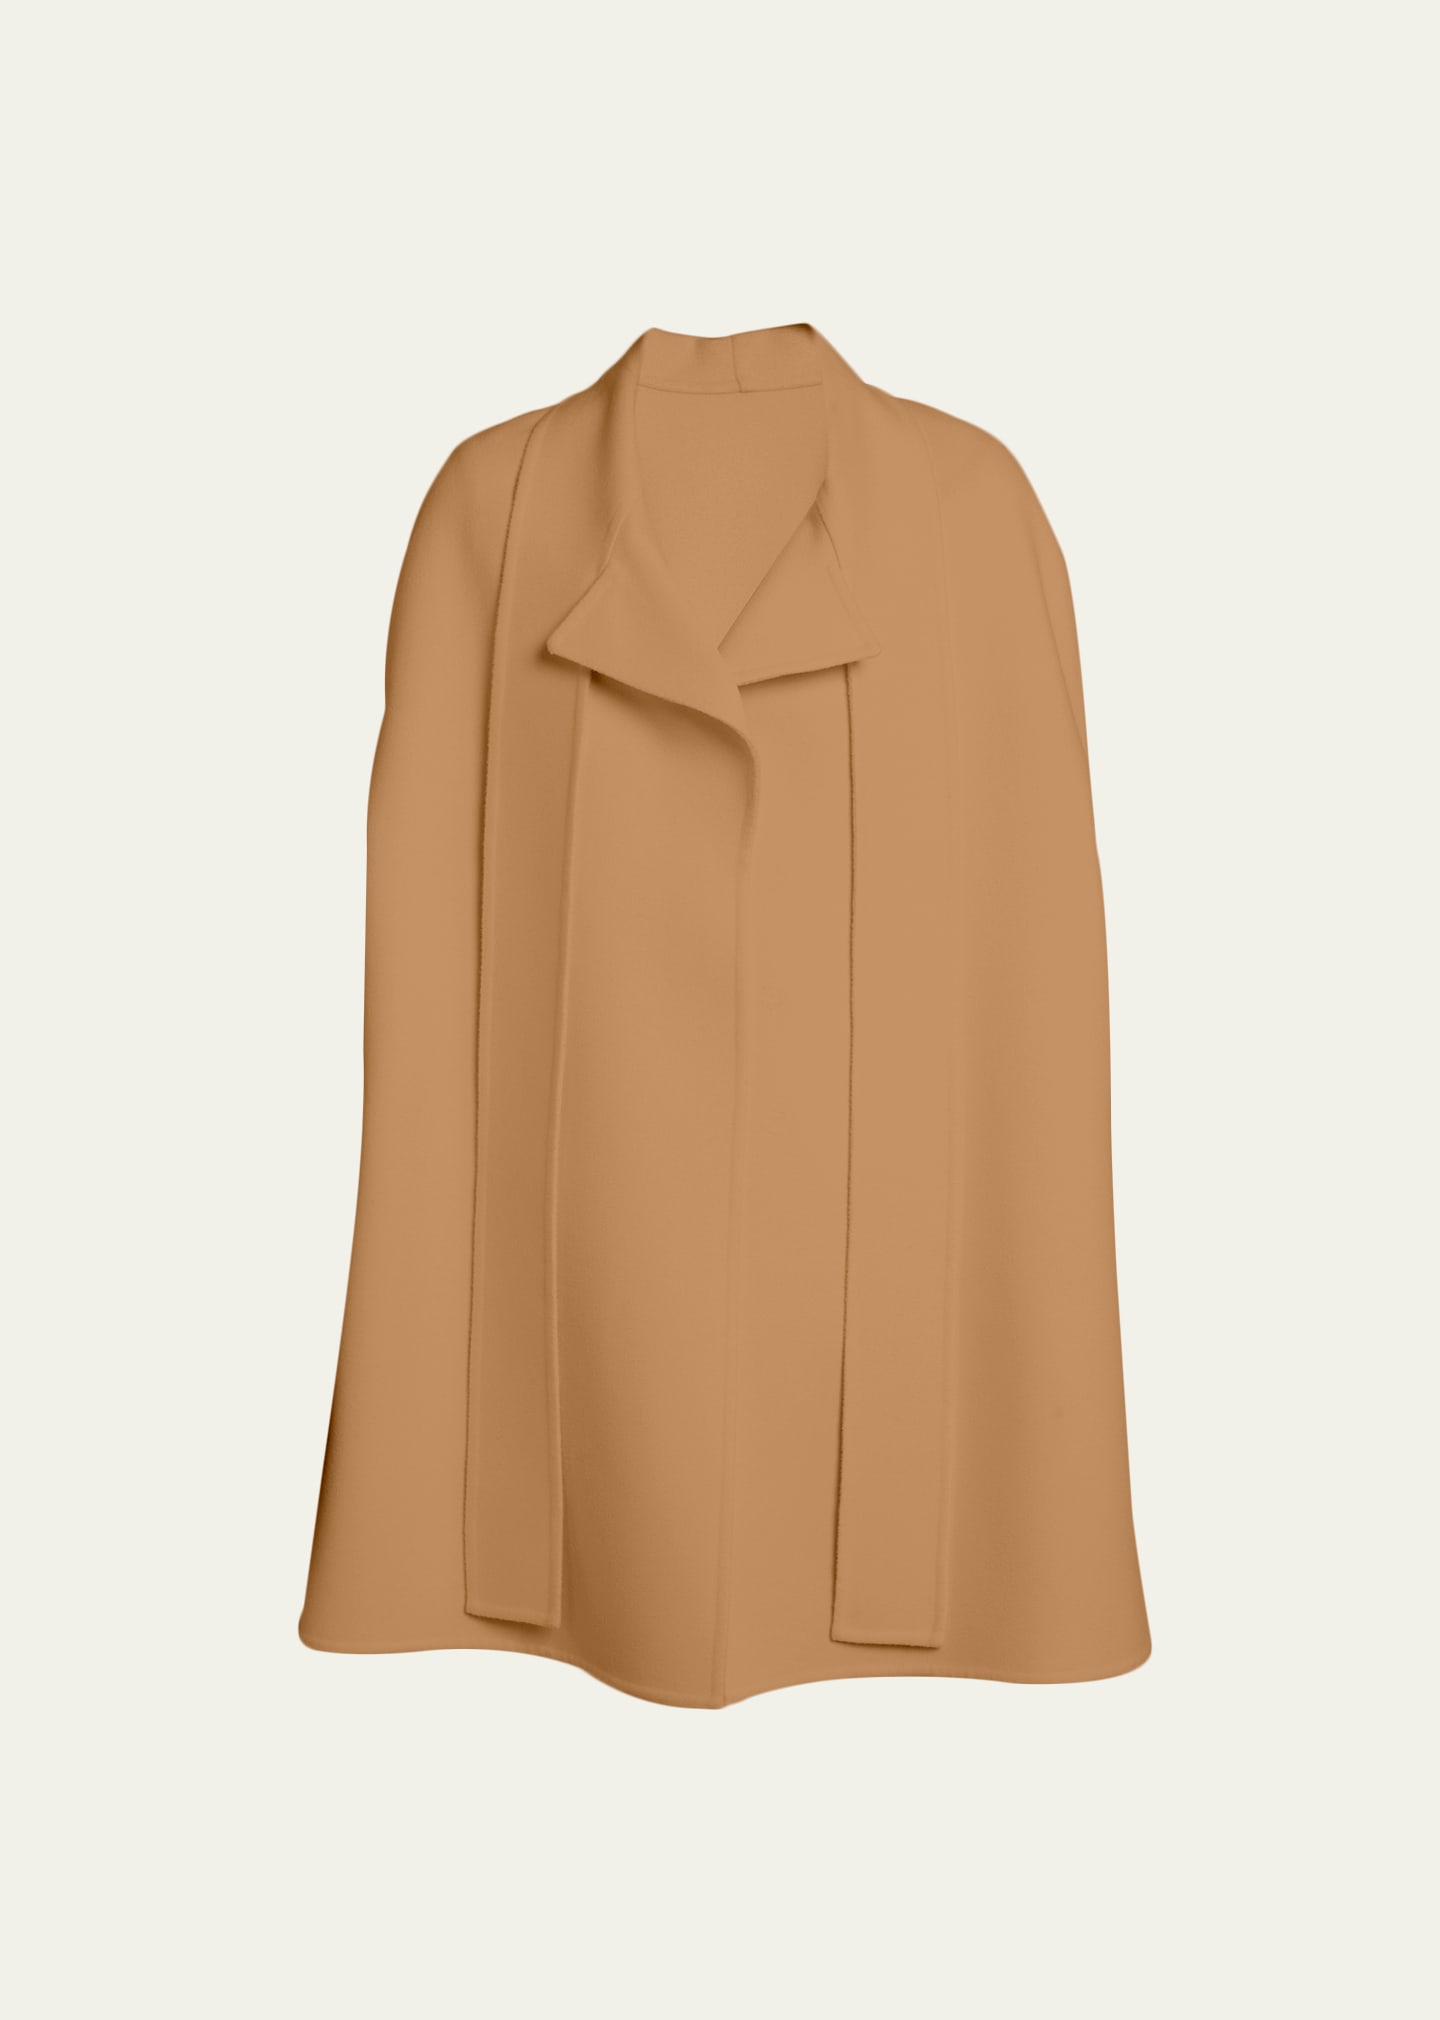 Wool-Cashmere Cape with Ties